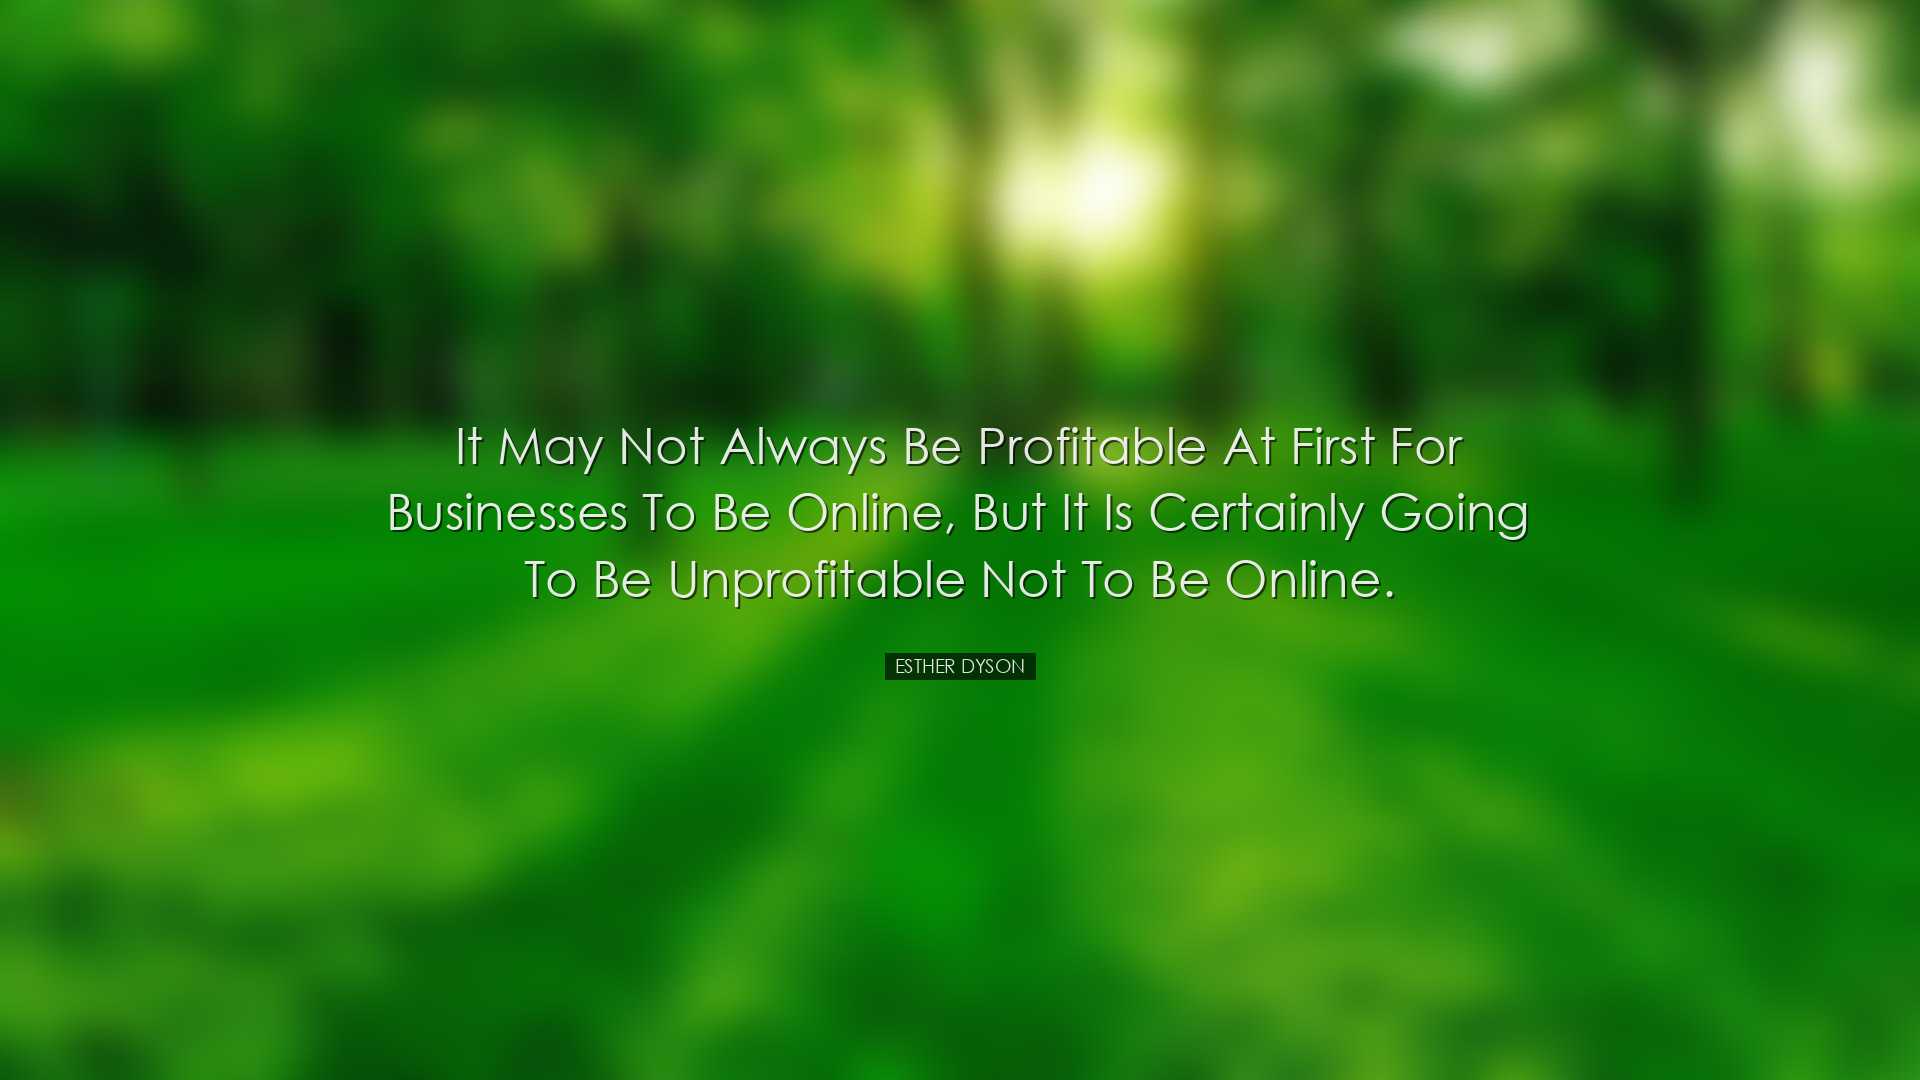 It may not always be profitable at first for businesses to be onli